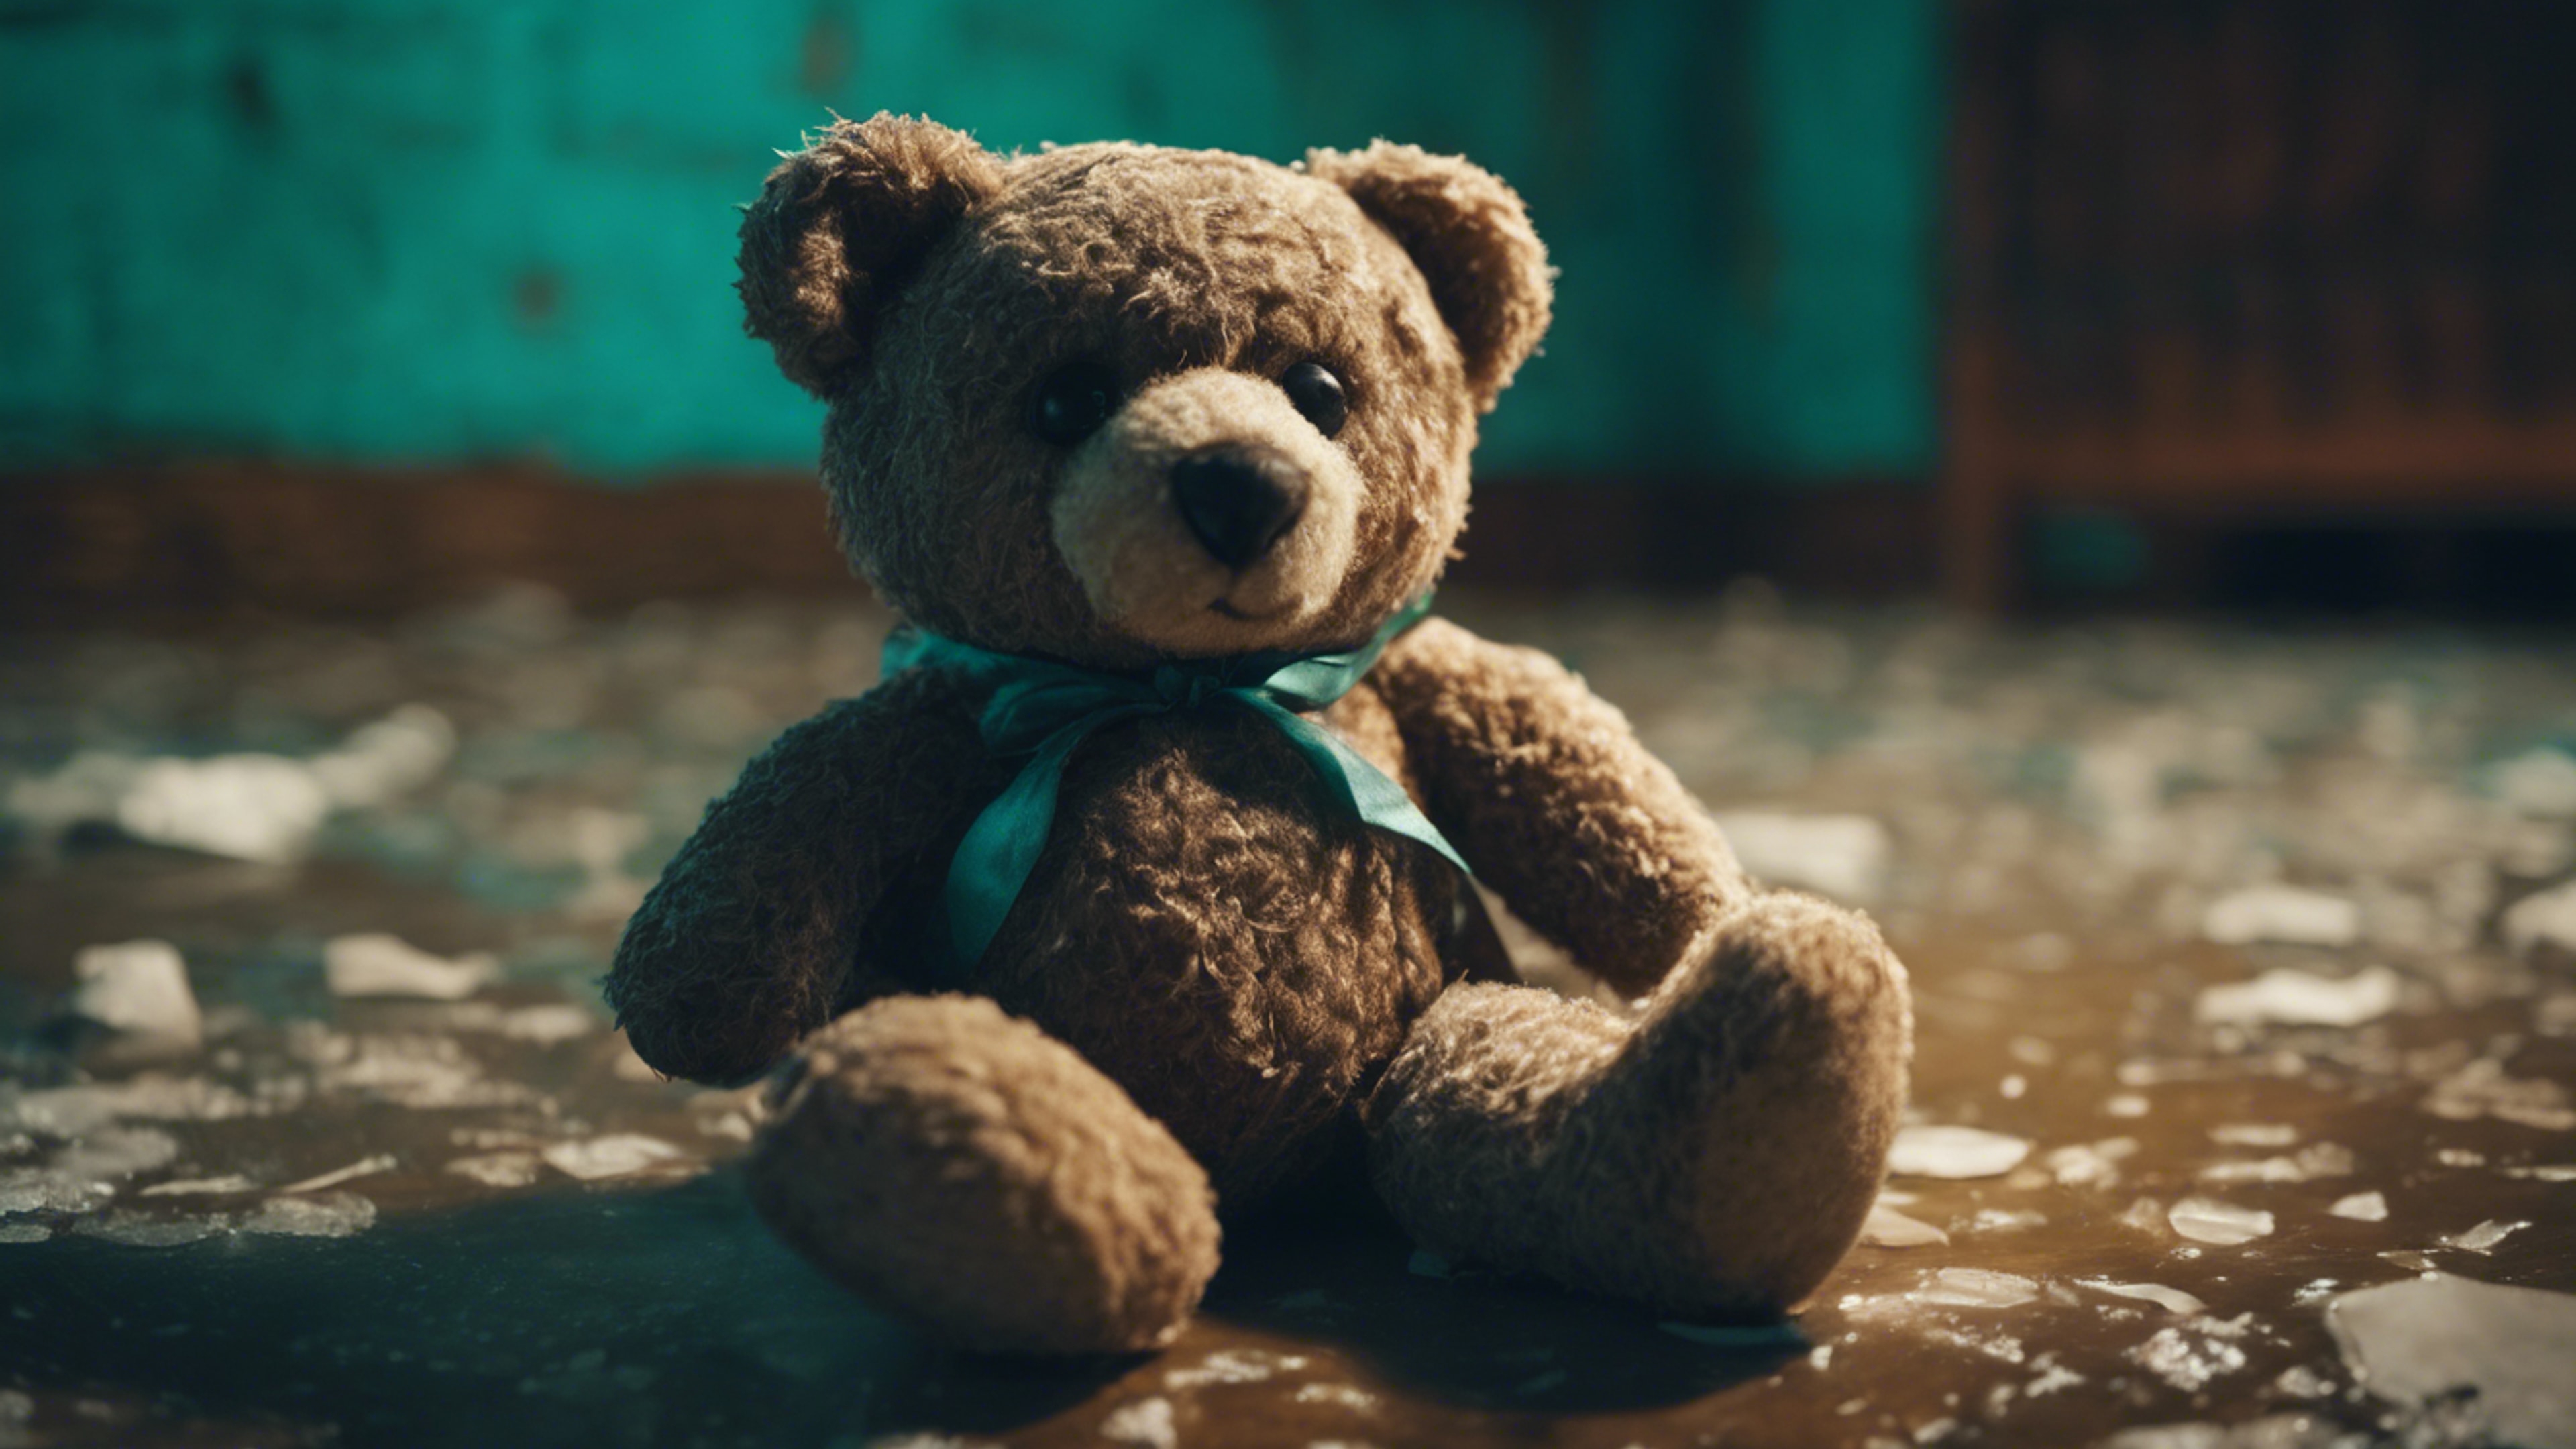 An orphaned gothic teddy bear lying in a quiet abandoned room illuminated in teal. Валлпапер[f4613294cb5e4a2b934c]